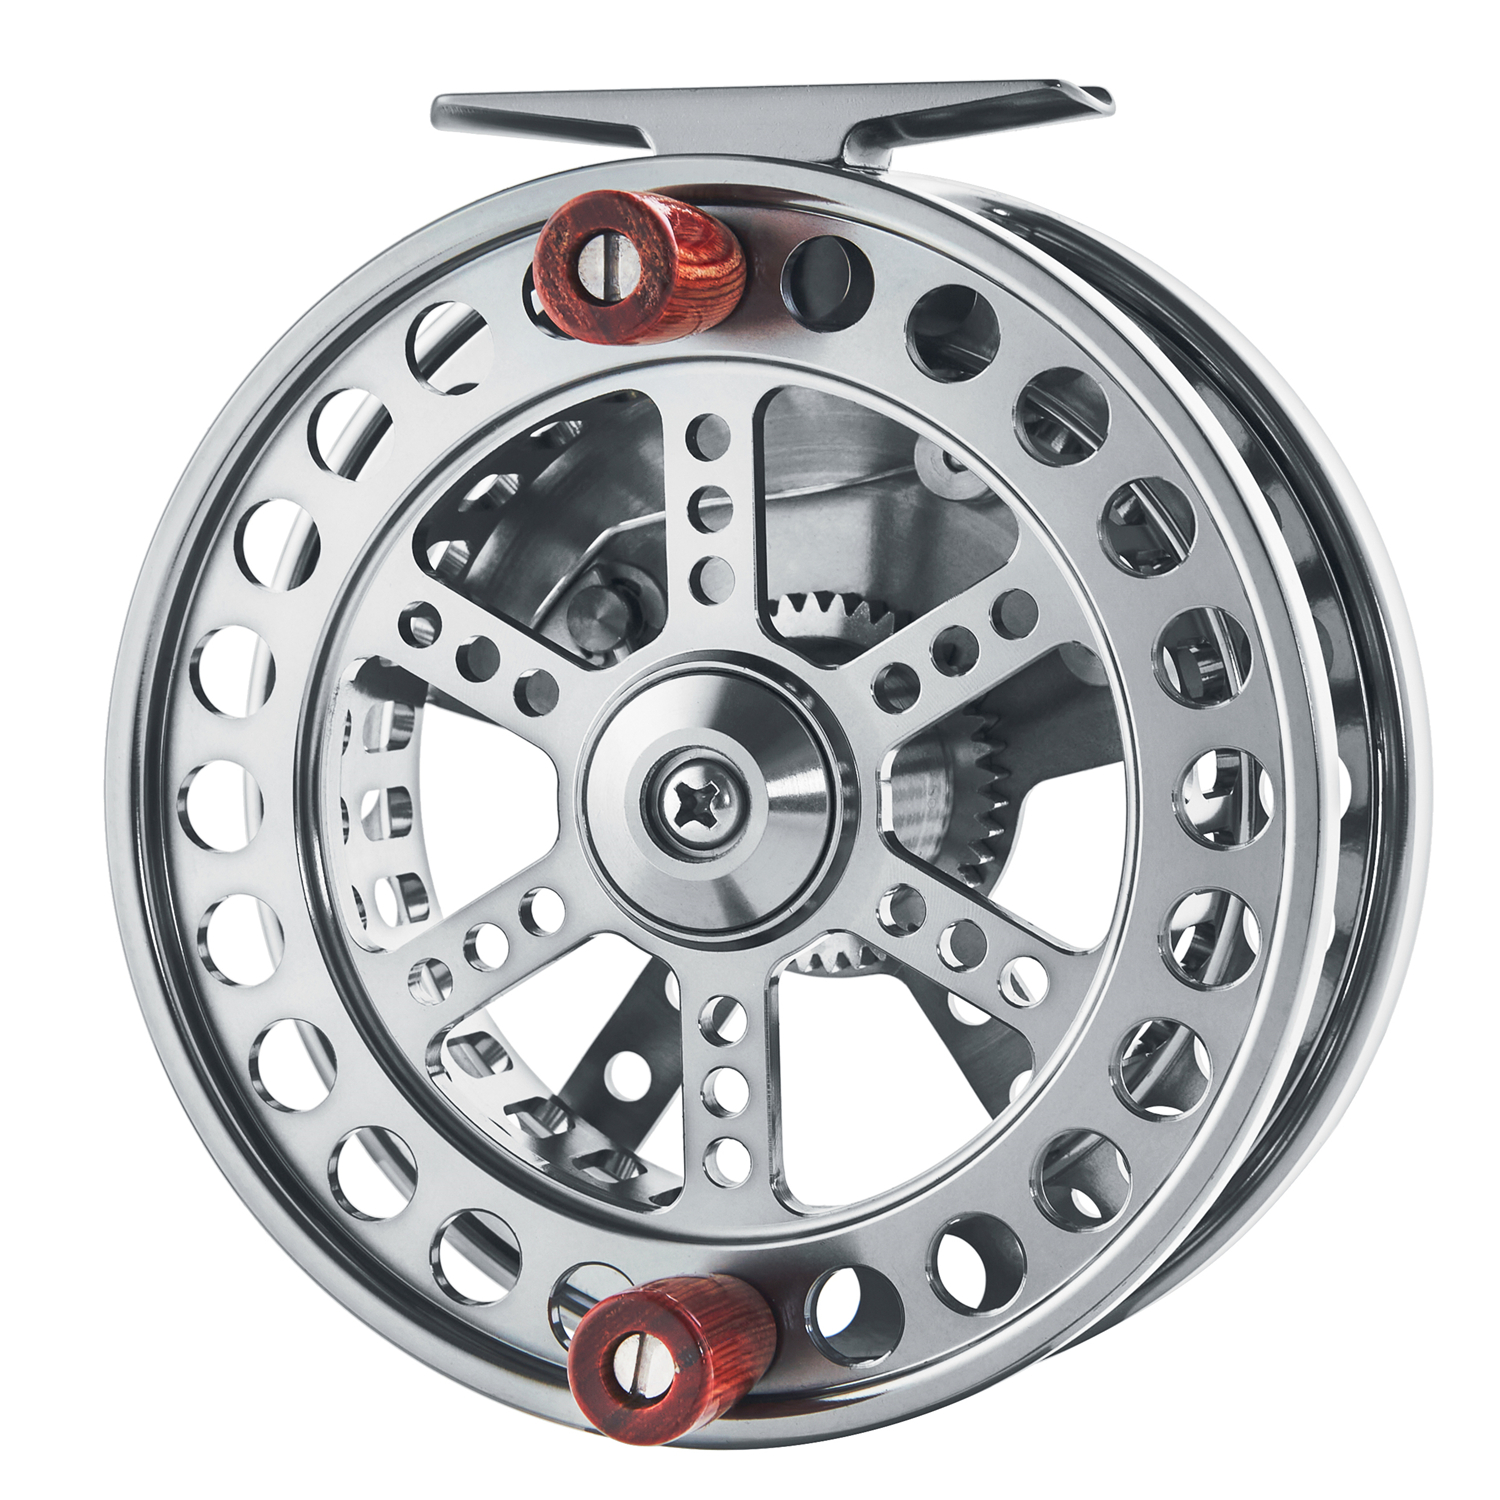 Spinning reel recommendations for salmon/steelhead